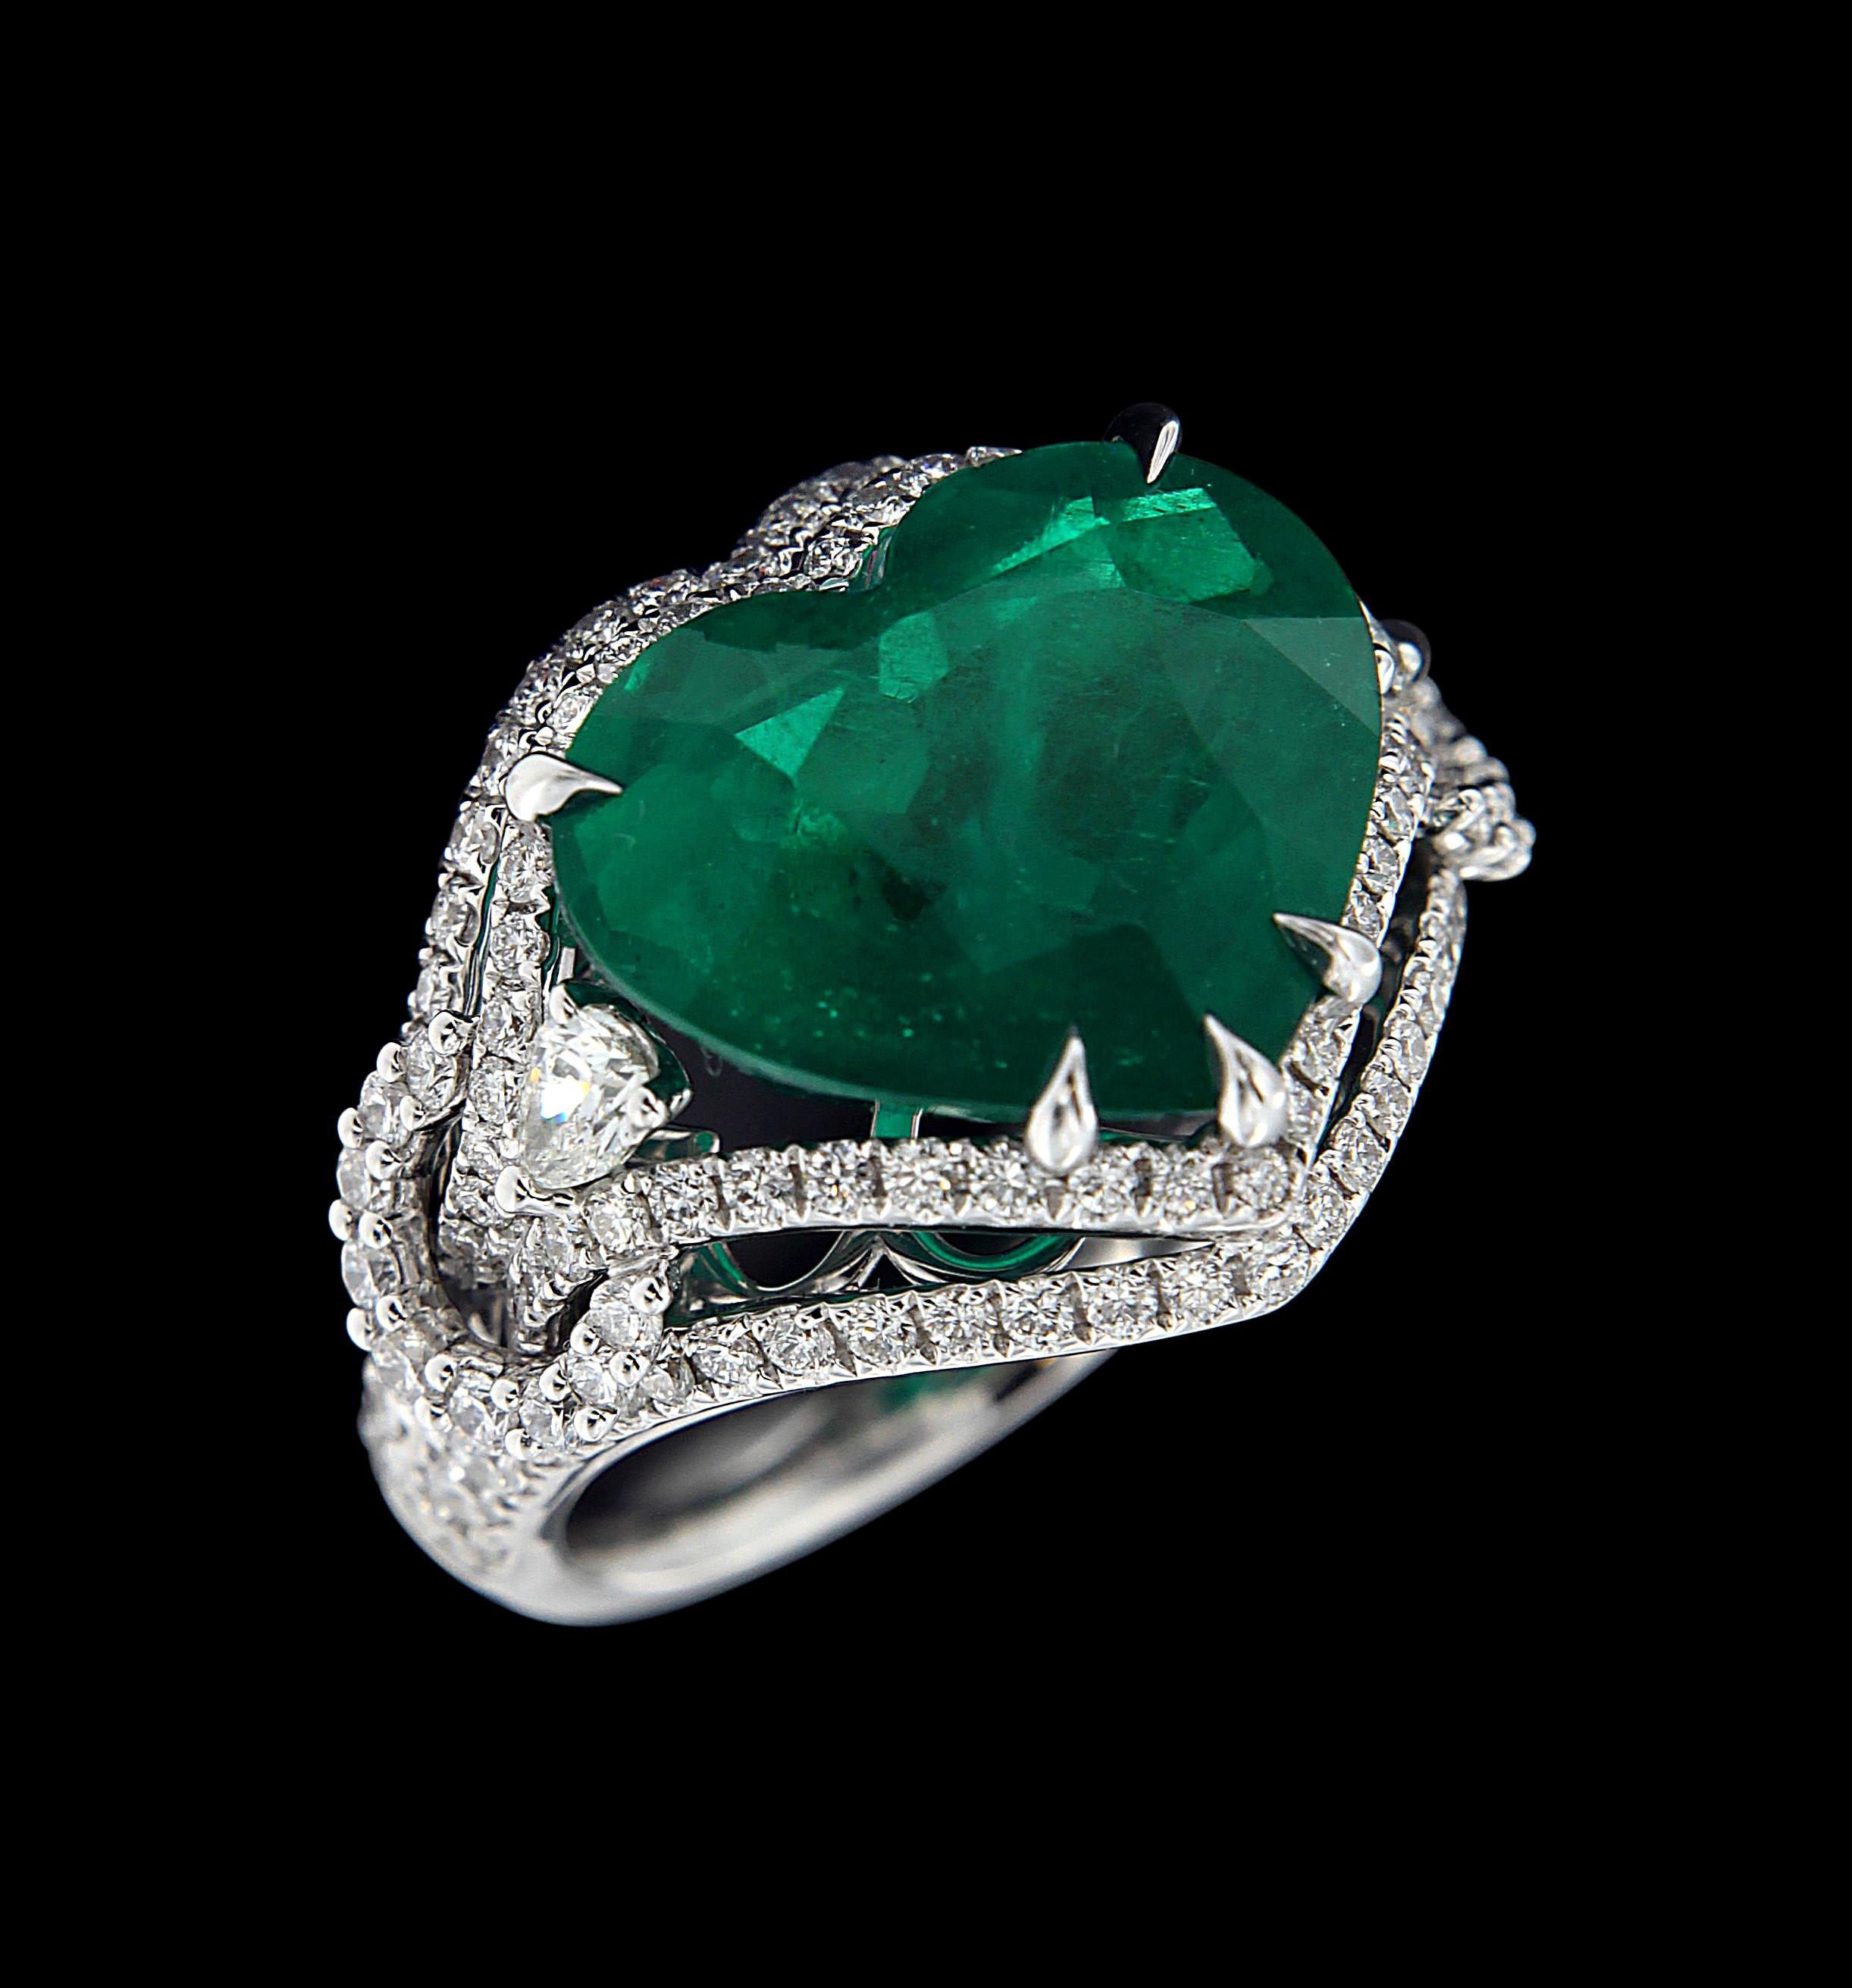 Breathtaking 18 karat White Gold, Diamond And Emerald Ring
Rings:
Diamonds of approximately 1.621carats, emerald approximately of 9.600carats mounted on 18 karat white gold ring. The ring weighs approximately around 9.896grams.
Please note: The